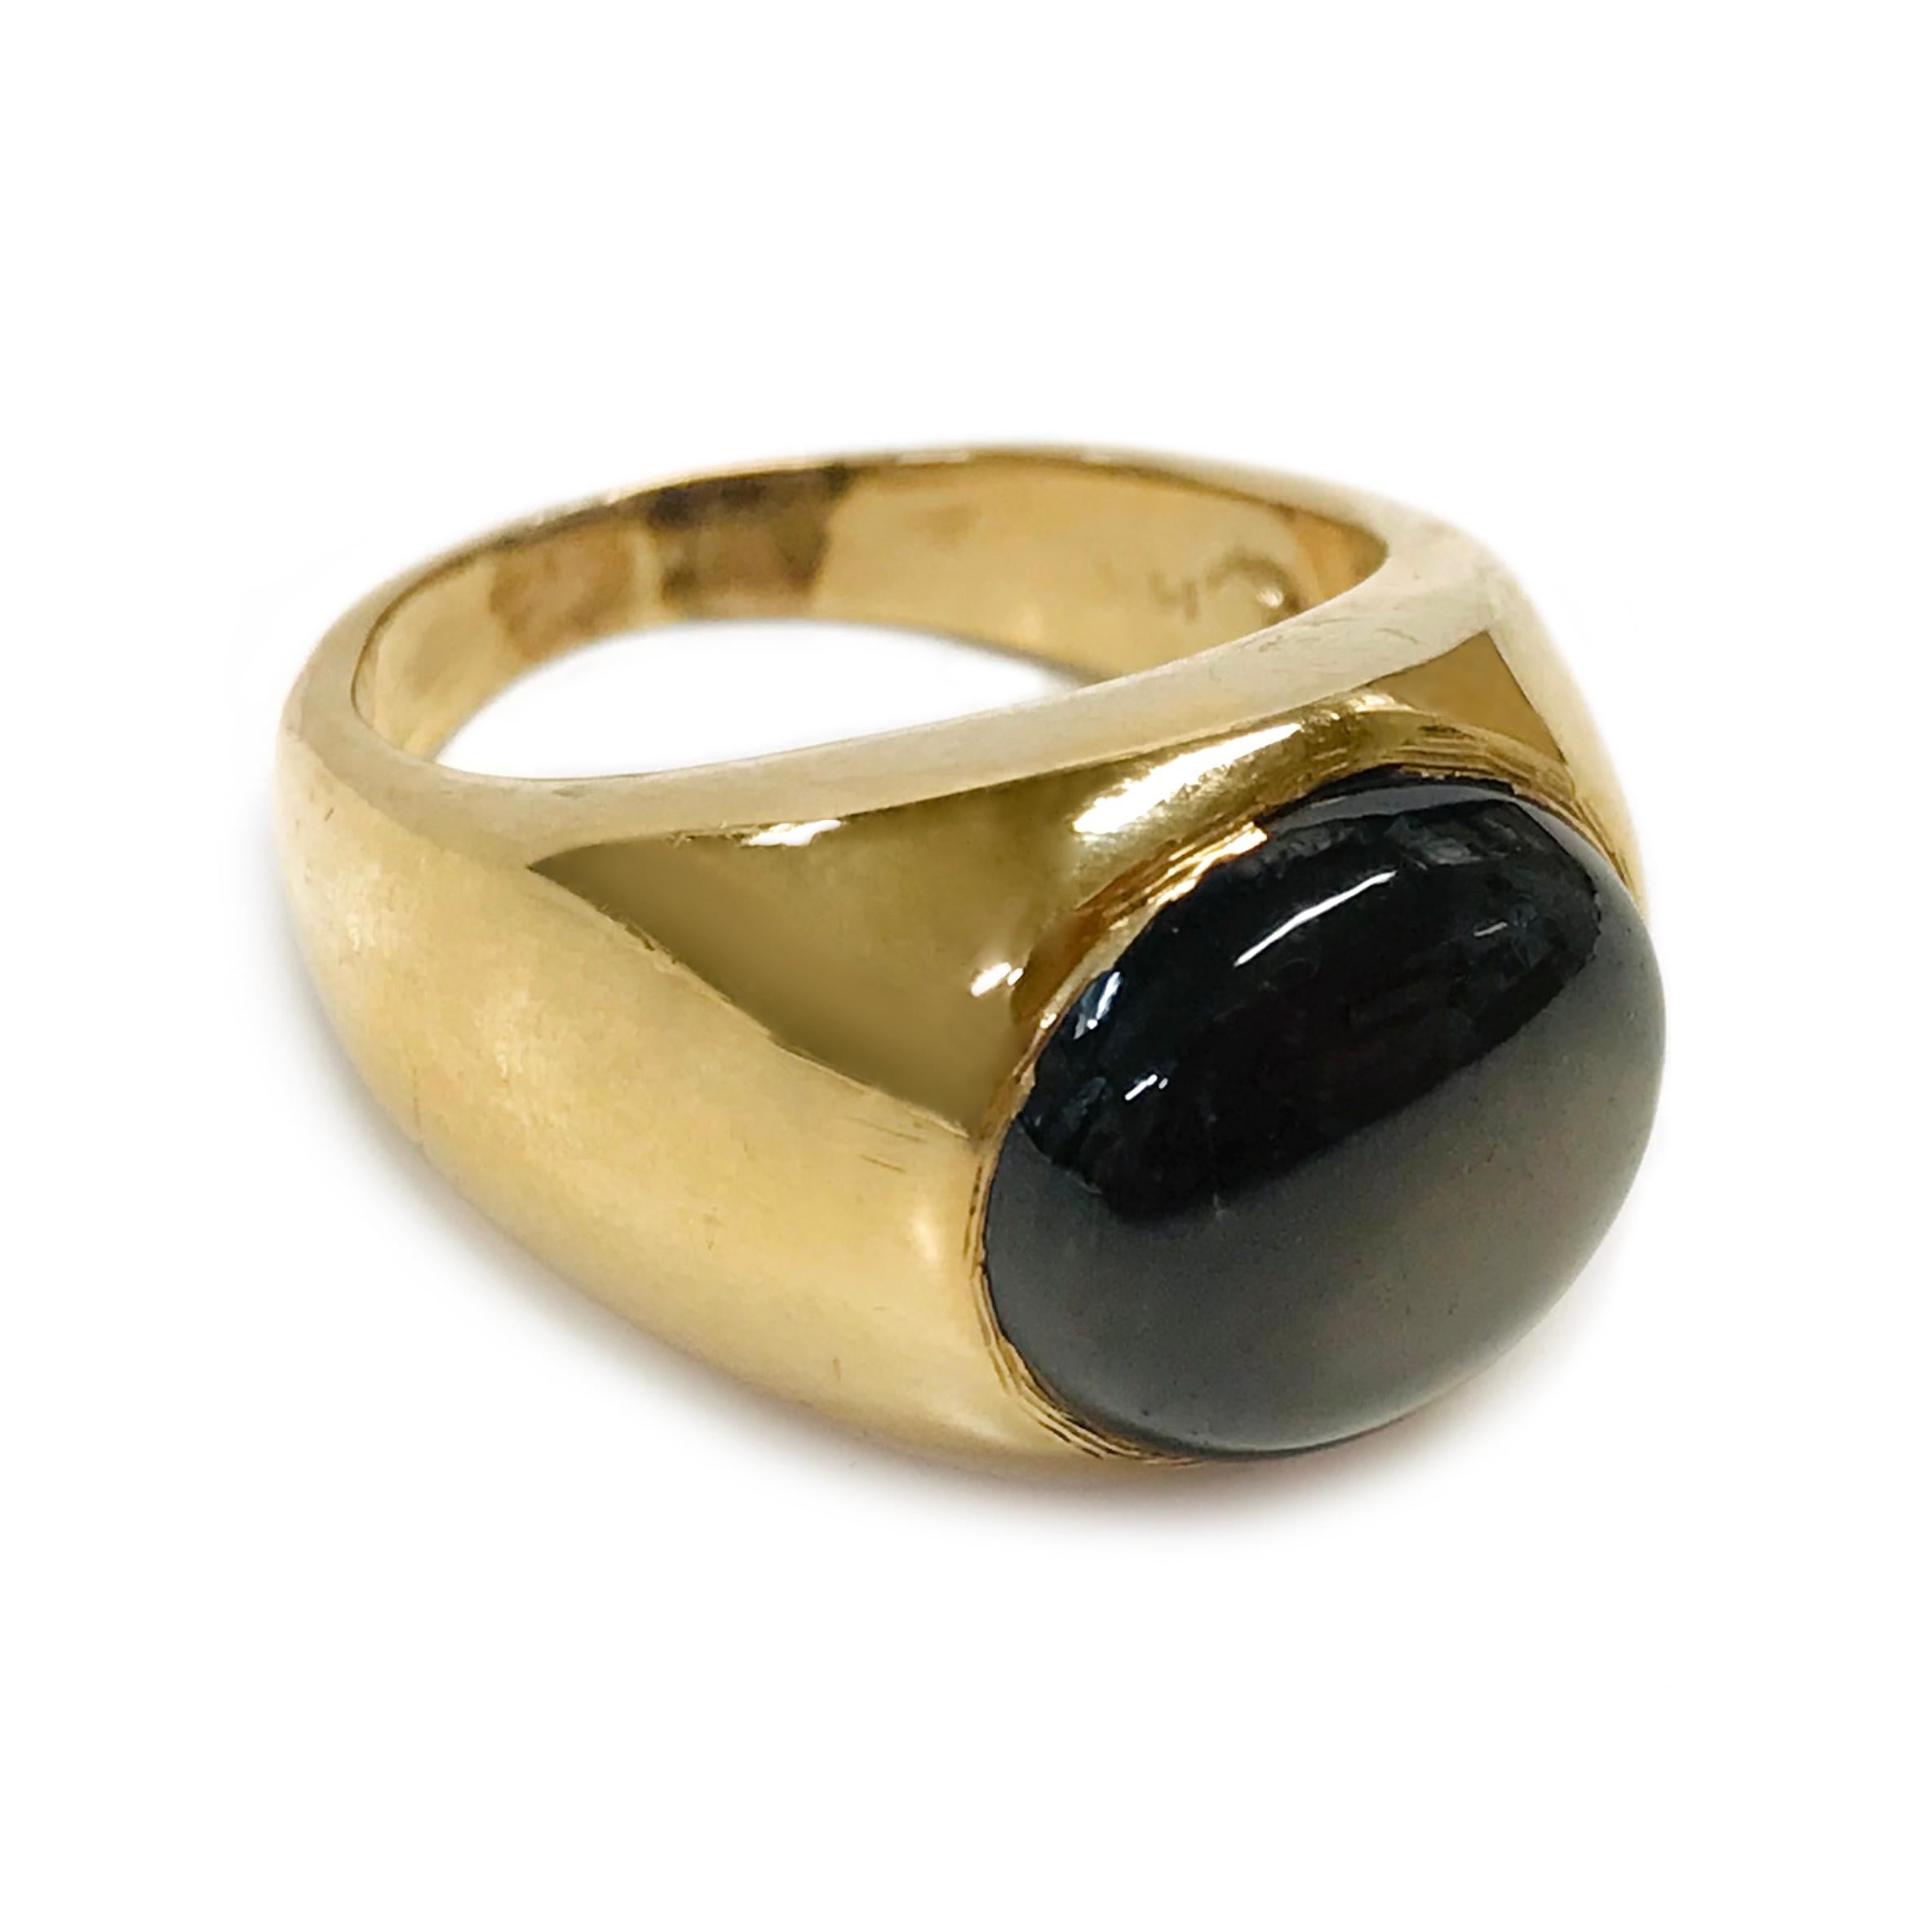 14 Karat Round Black Star Sapphire Ring. The ring features a bezel-set round black star sapphire. The six-star sapphire has great presence with light. The sapphire measures 12mm and the ring size is 6 3/4. The ring has a smooth shiny finish with a